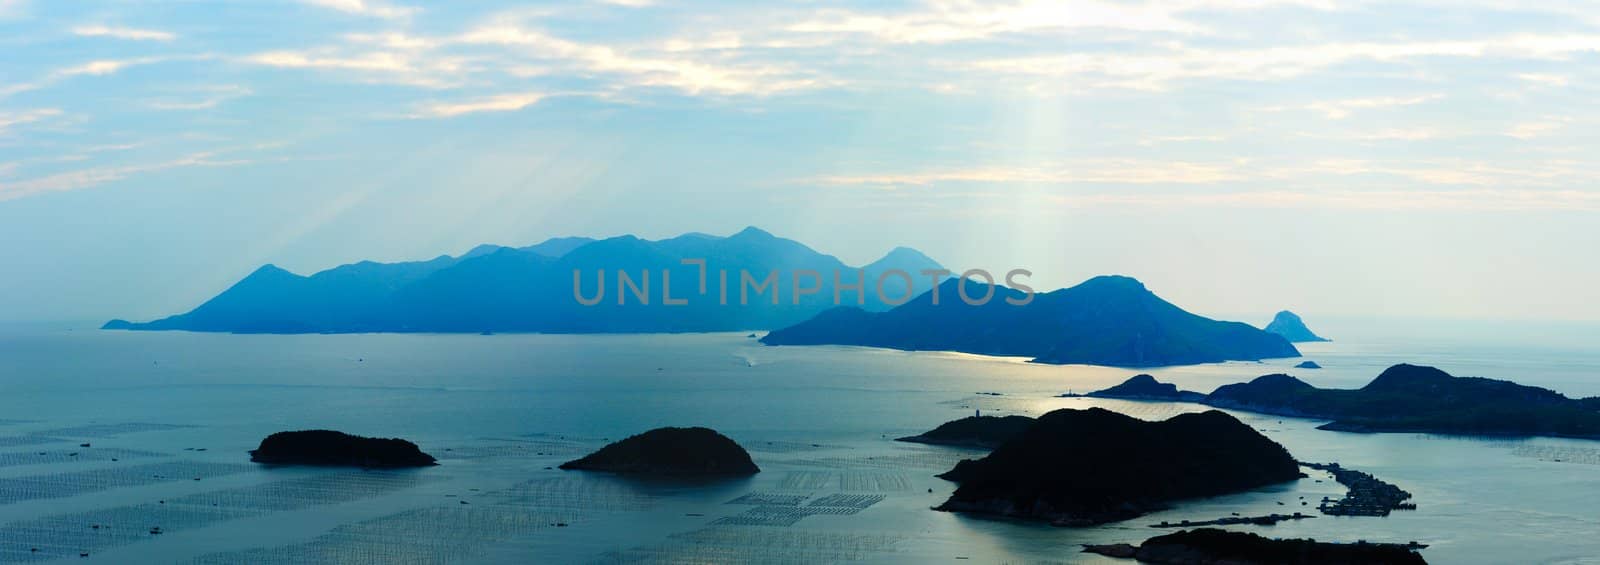 Ocean landscape with sunshine, islands and mountains